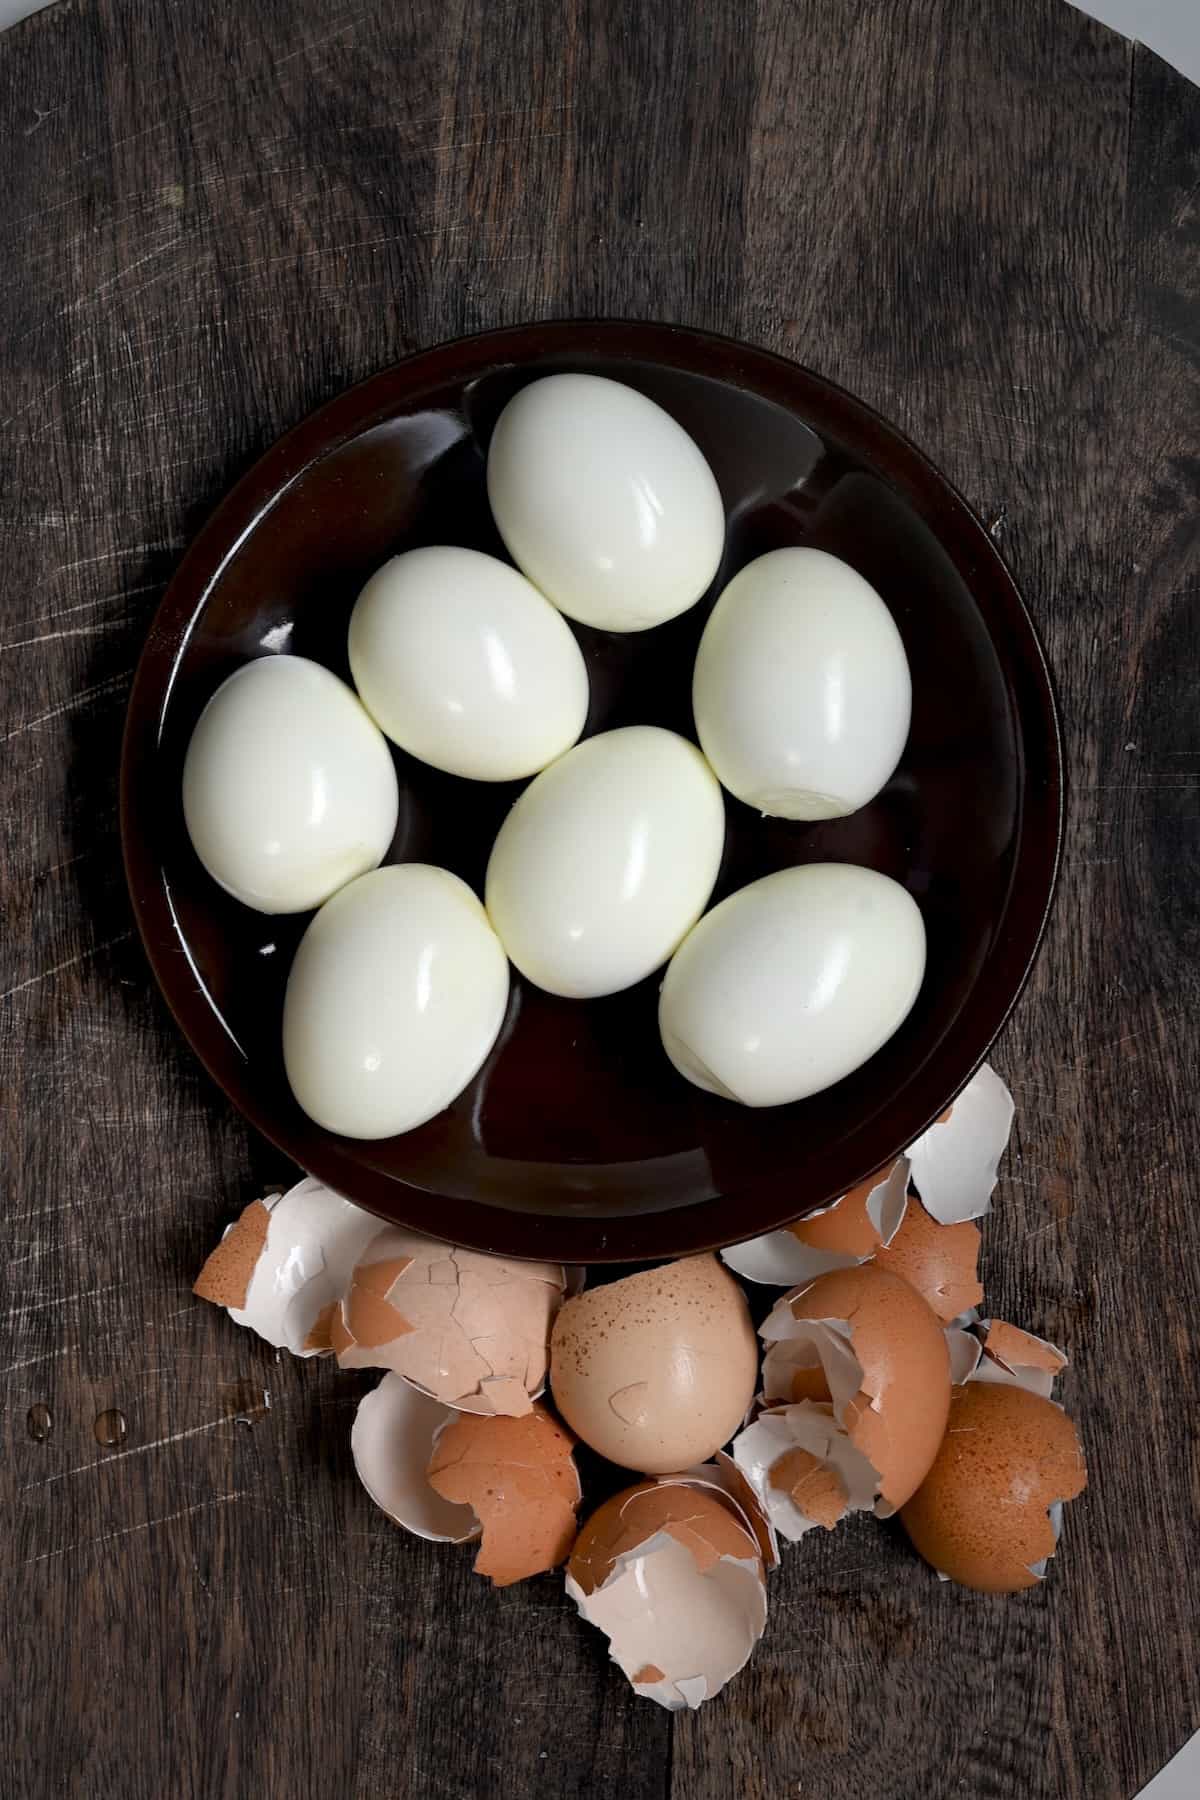 Seven cooked peeled eggs on a plate